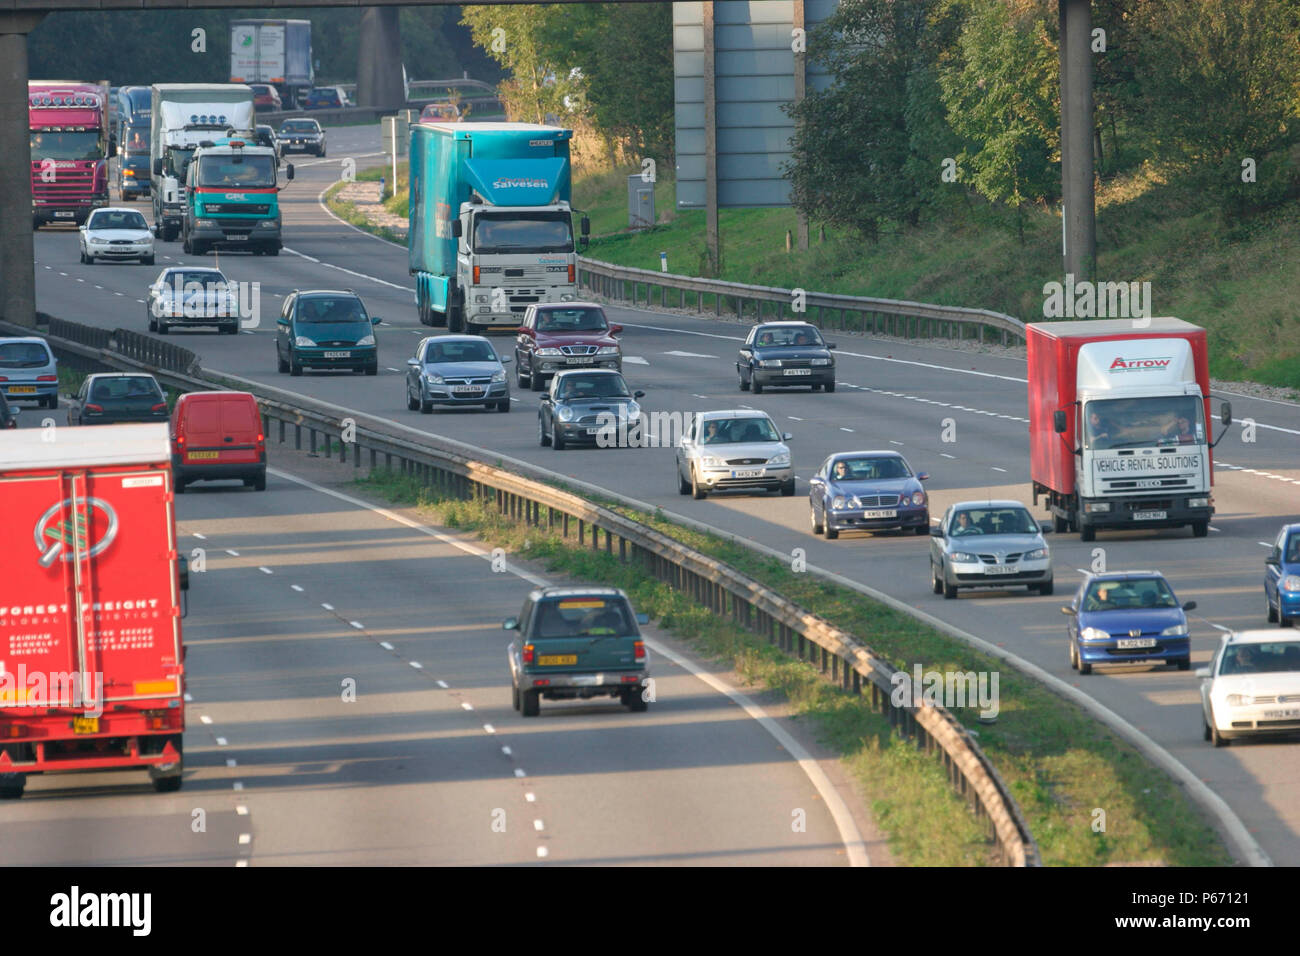 Traffic on the M1 motorway in Leicestershire, England. October 2004. Stock Photo